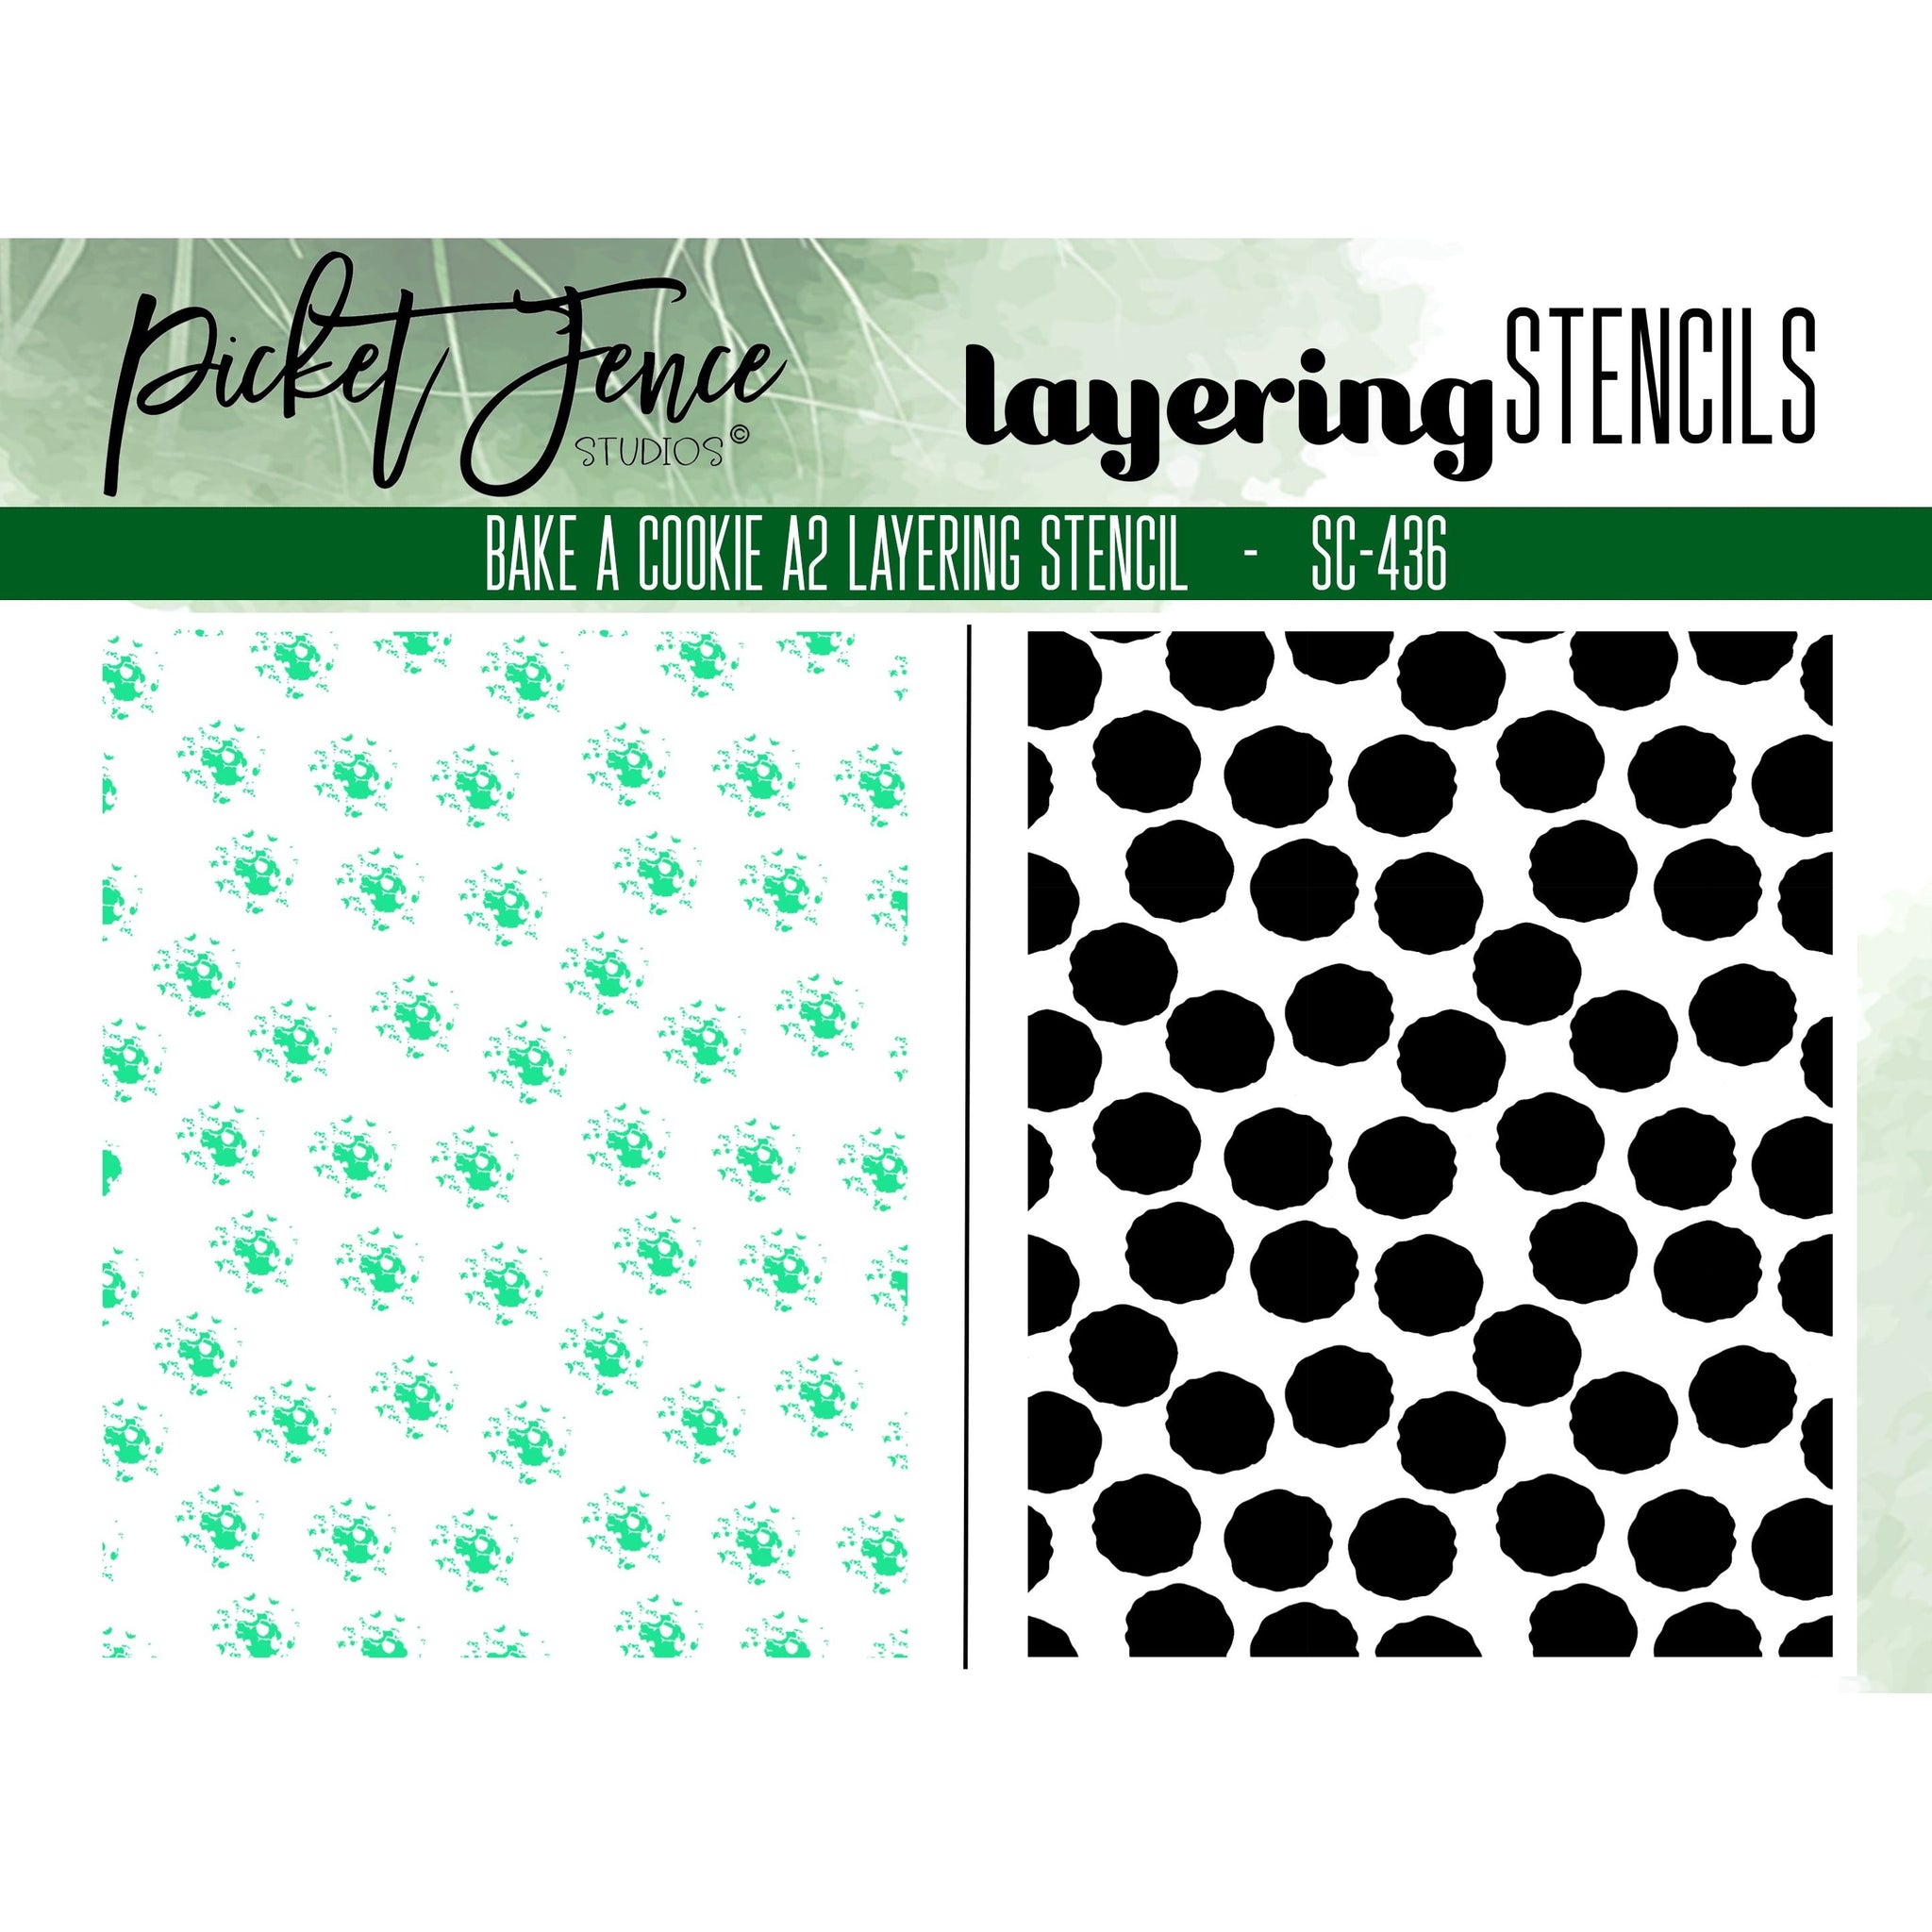 Bake a Cookie A2 Layering Stencil Set